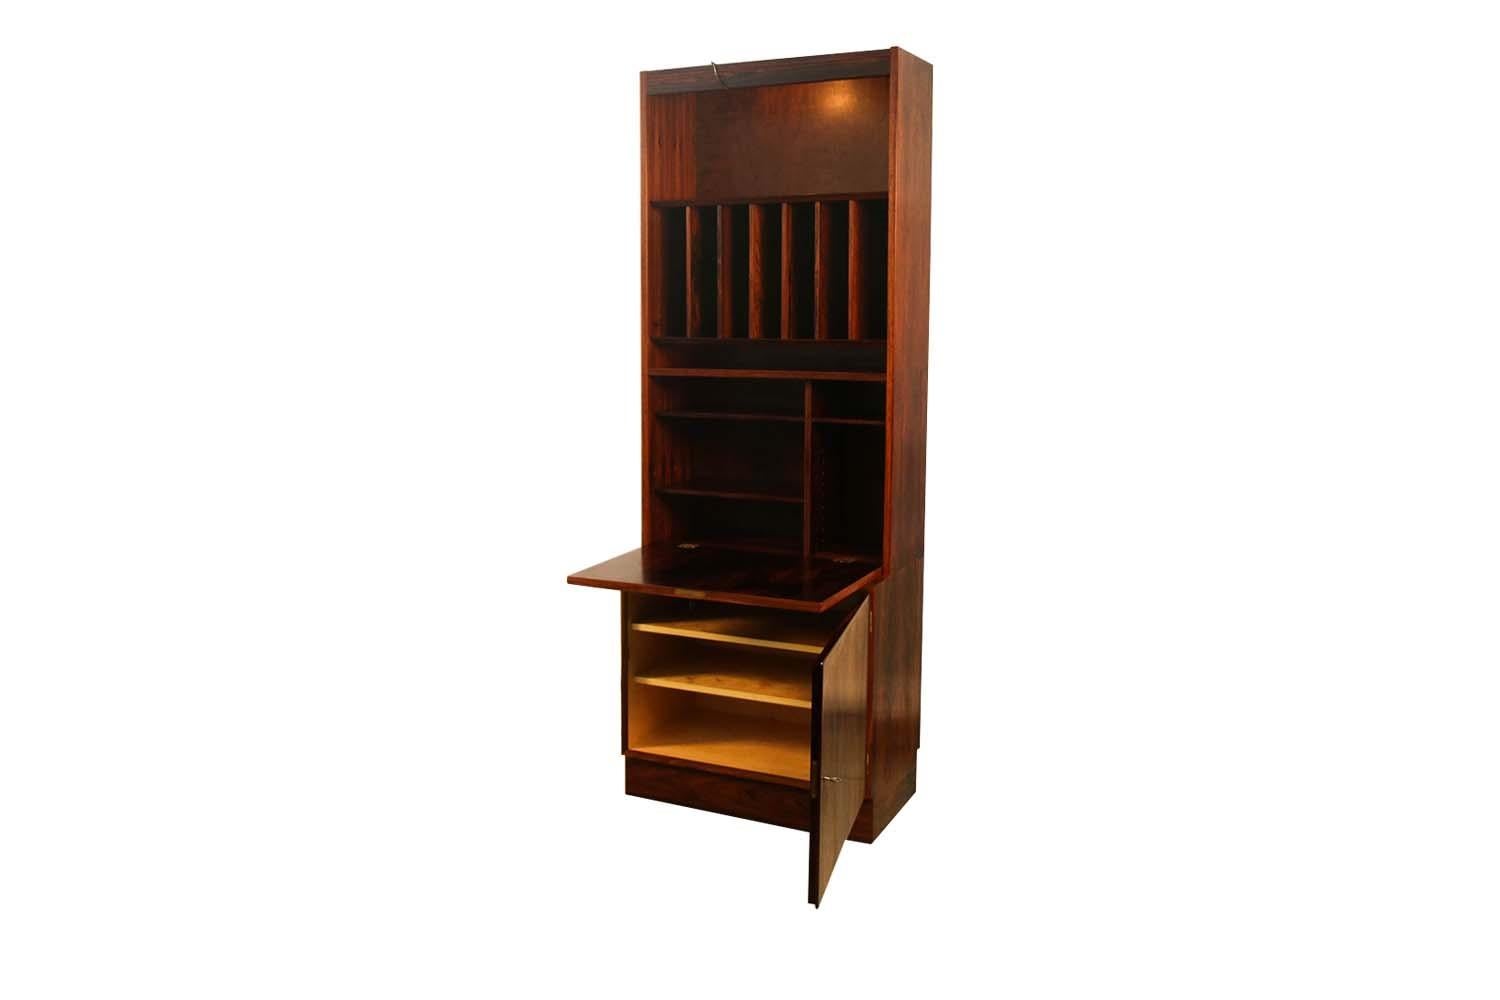 Fantastic Danish rosewood storage cabinet by designer Poul Hundevad. This amazing vintage Rosewood veneer storage cabinet features a large open and divided storage cavity above a locking closed storage cabinet resting on a modern recessed plinth